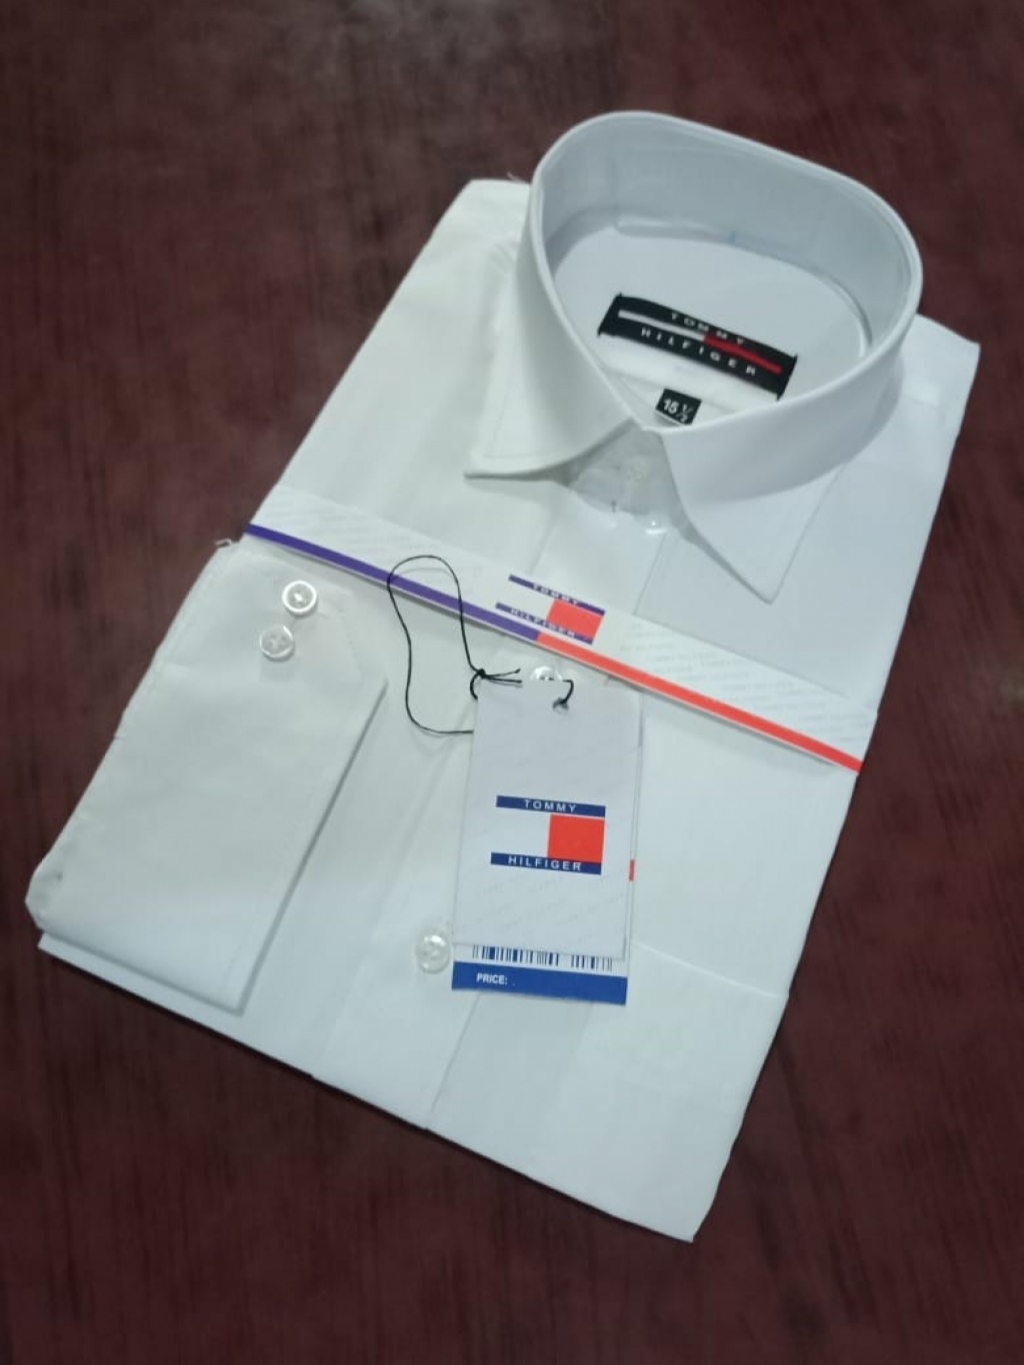 buy cheap tommy hilfiger clothing